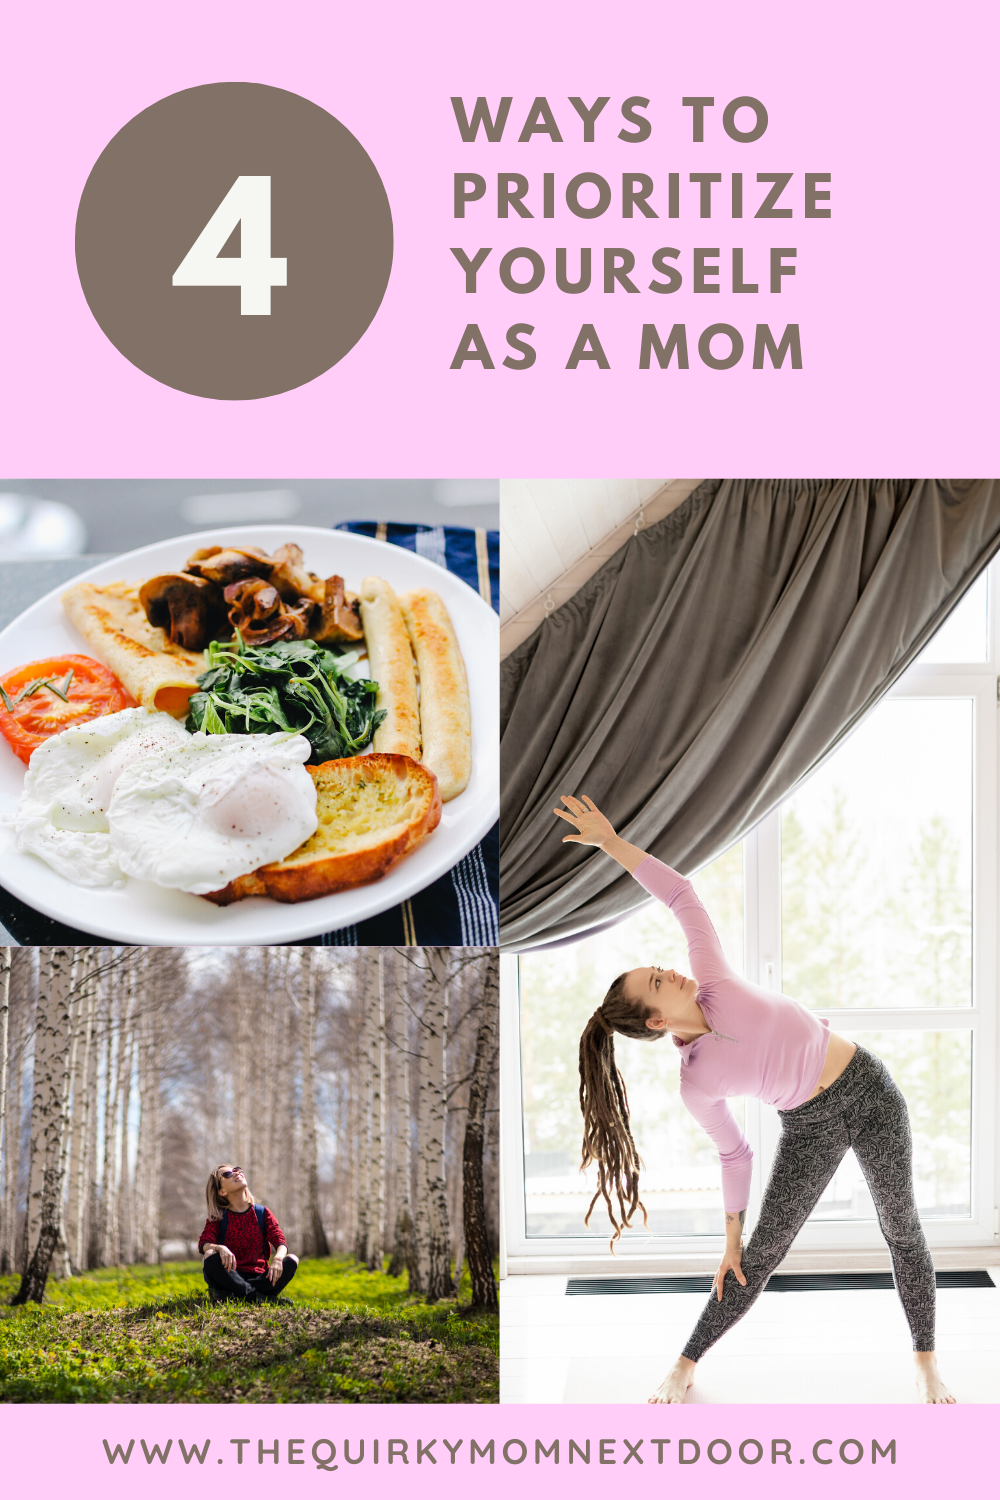 4 ways to prioritize yourself as a mom